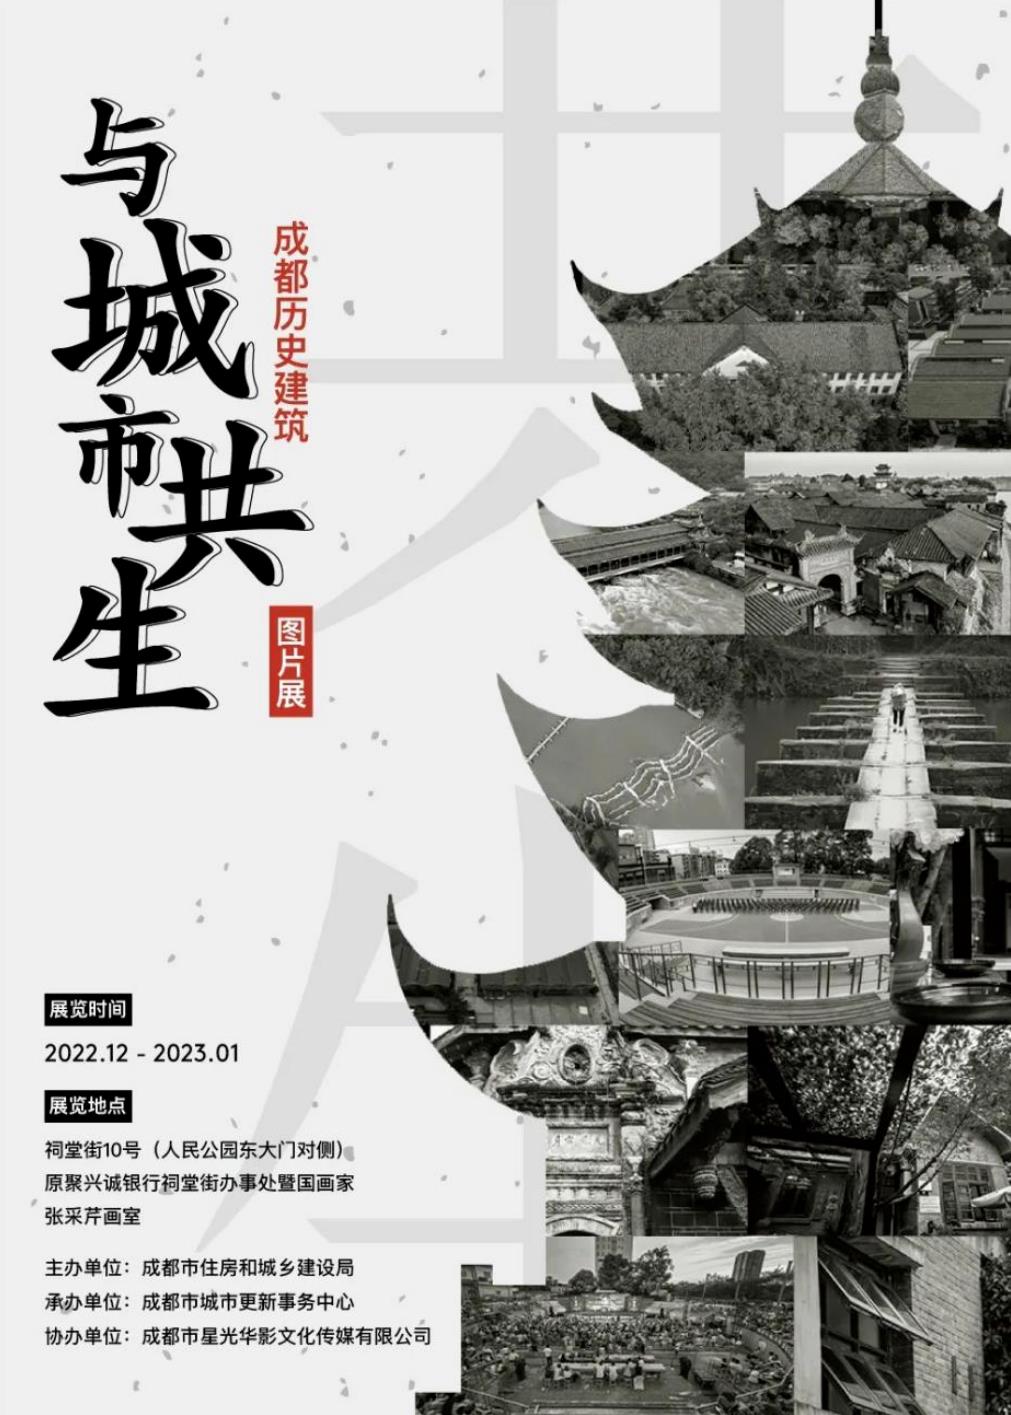 Symbiosis with the City - Photo Exhibition on Chengdu Historical Architecture